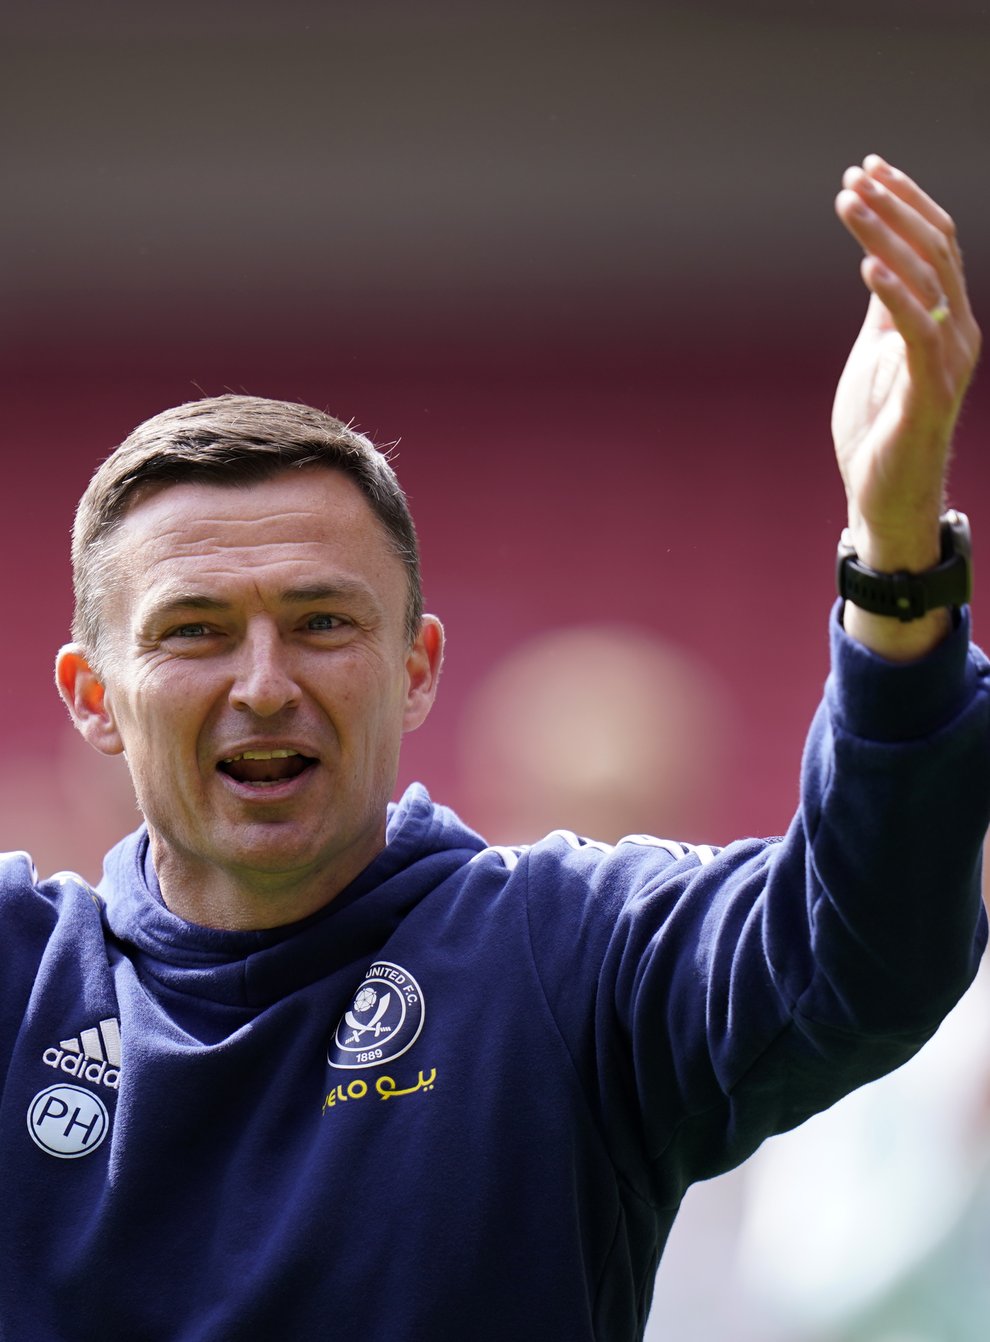 Sheffield United manager Paul Heckingbottom has urged his players to seize their chance against Fulham (Danny Lawson/PA).